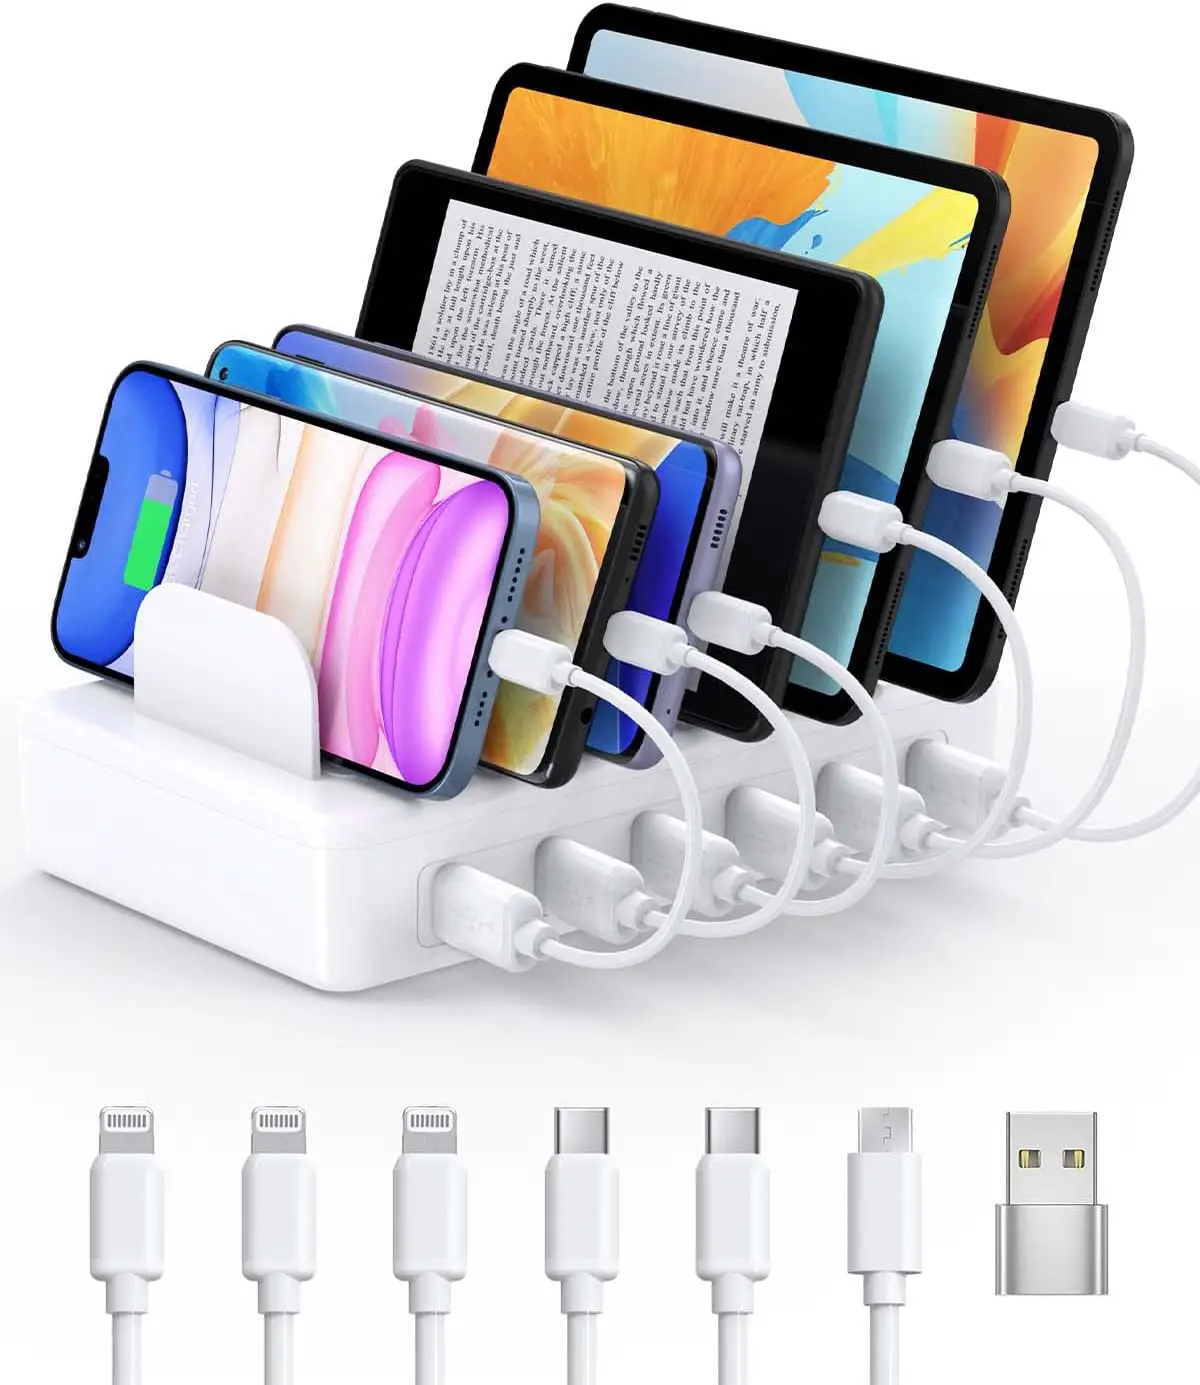 CREATIVE DESIGN Charging Station, 50W 6 Ports Multi Charger Station with 6 Charging Cables, USB Charging Dock for Multiple Devices, Compatible with Cellphone iPad Kindle Tablet and Other Electronic